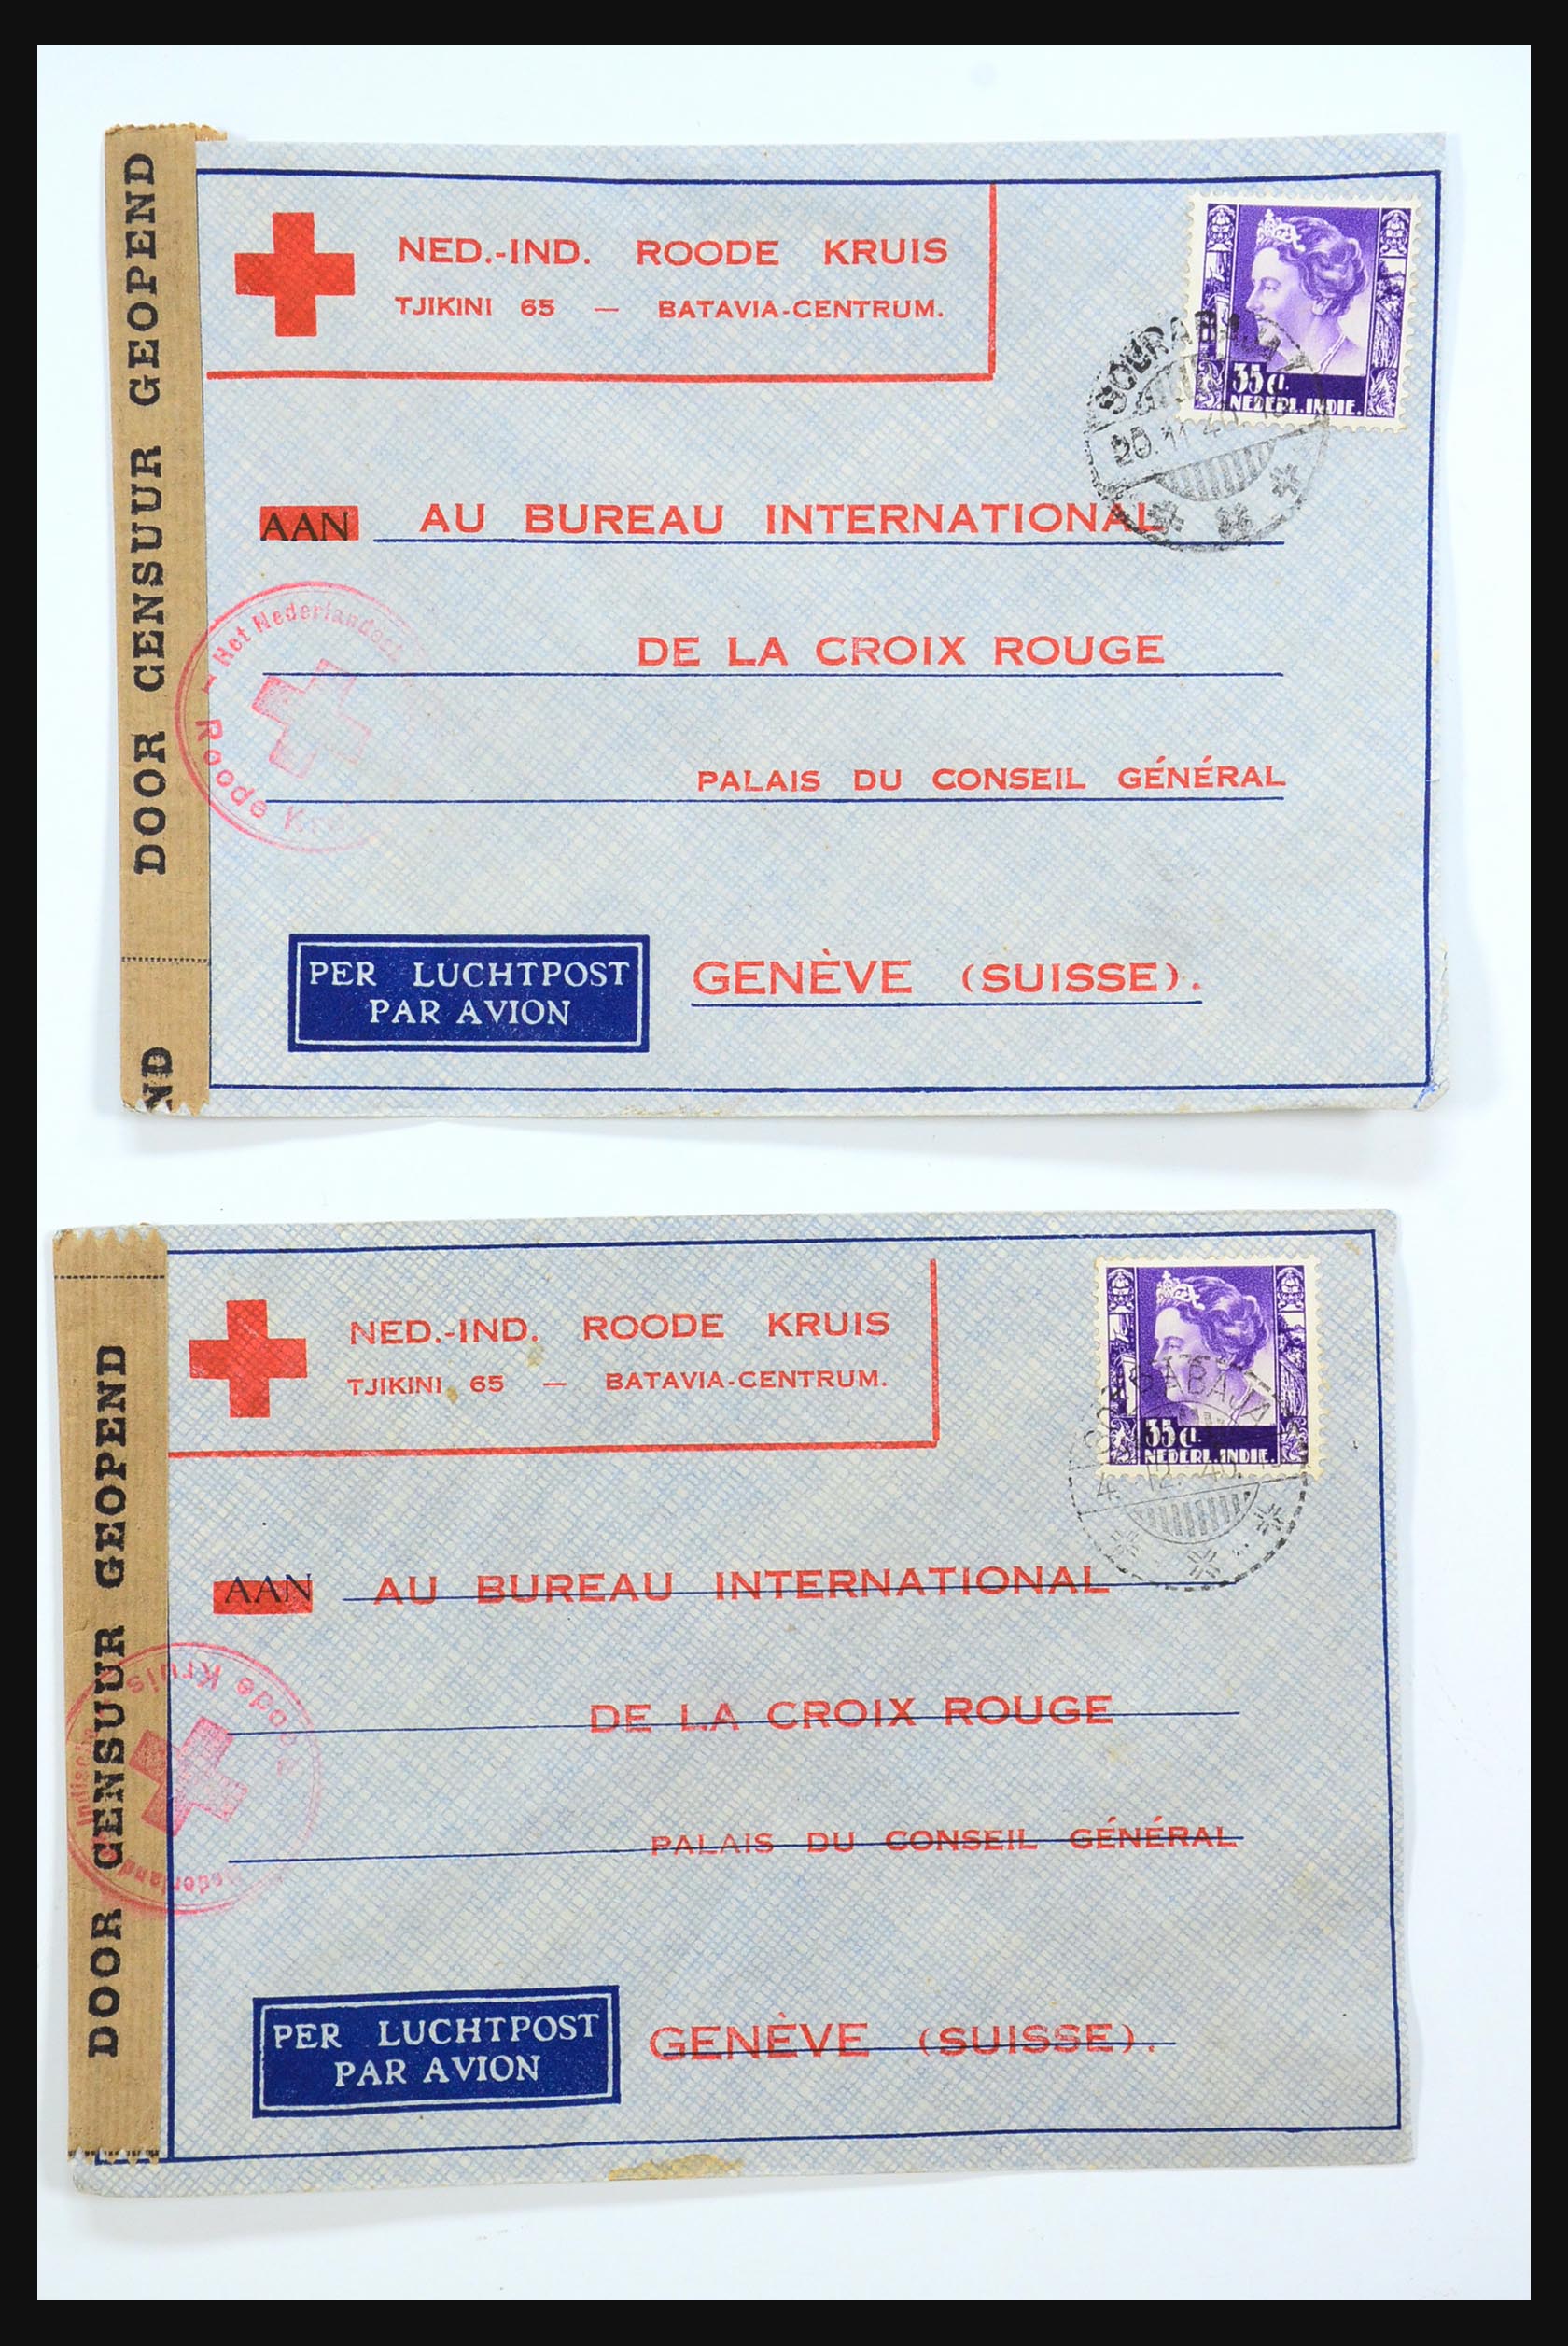 31362 110 - 31362 Netherlands Indies Japanese occupation covers 1942-1945.